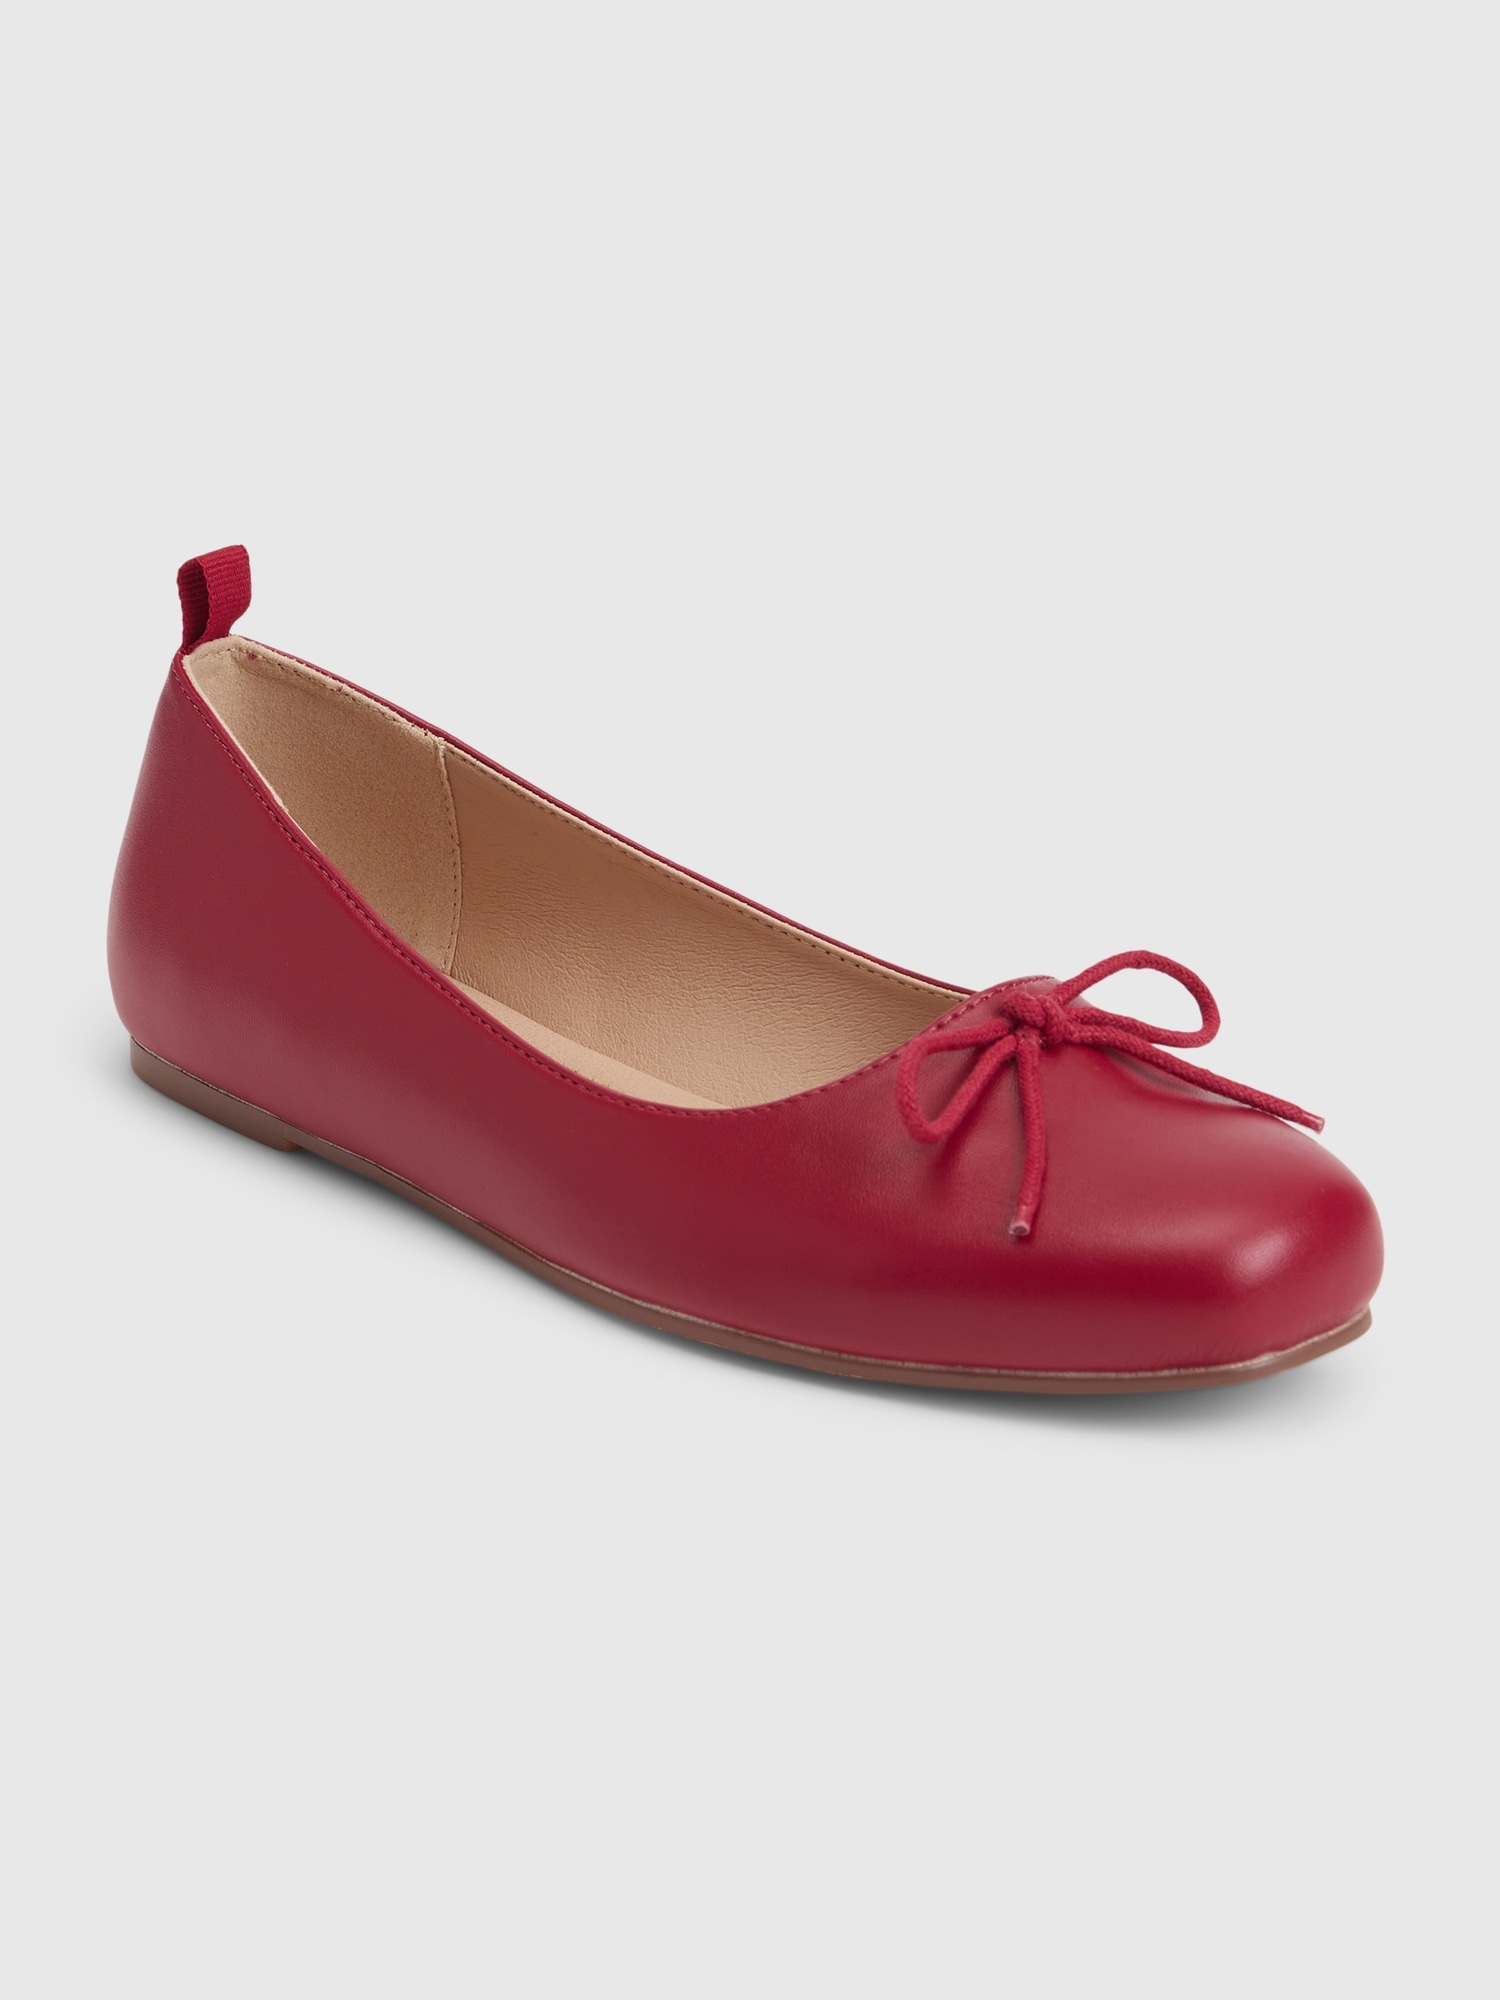 Gap Ballet Flats In Sled  Red